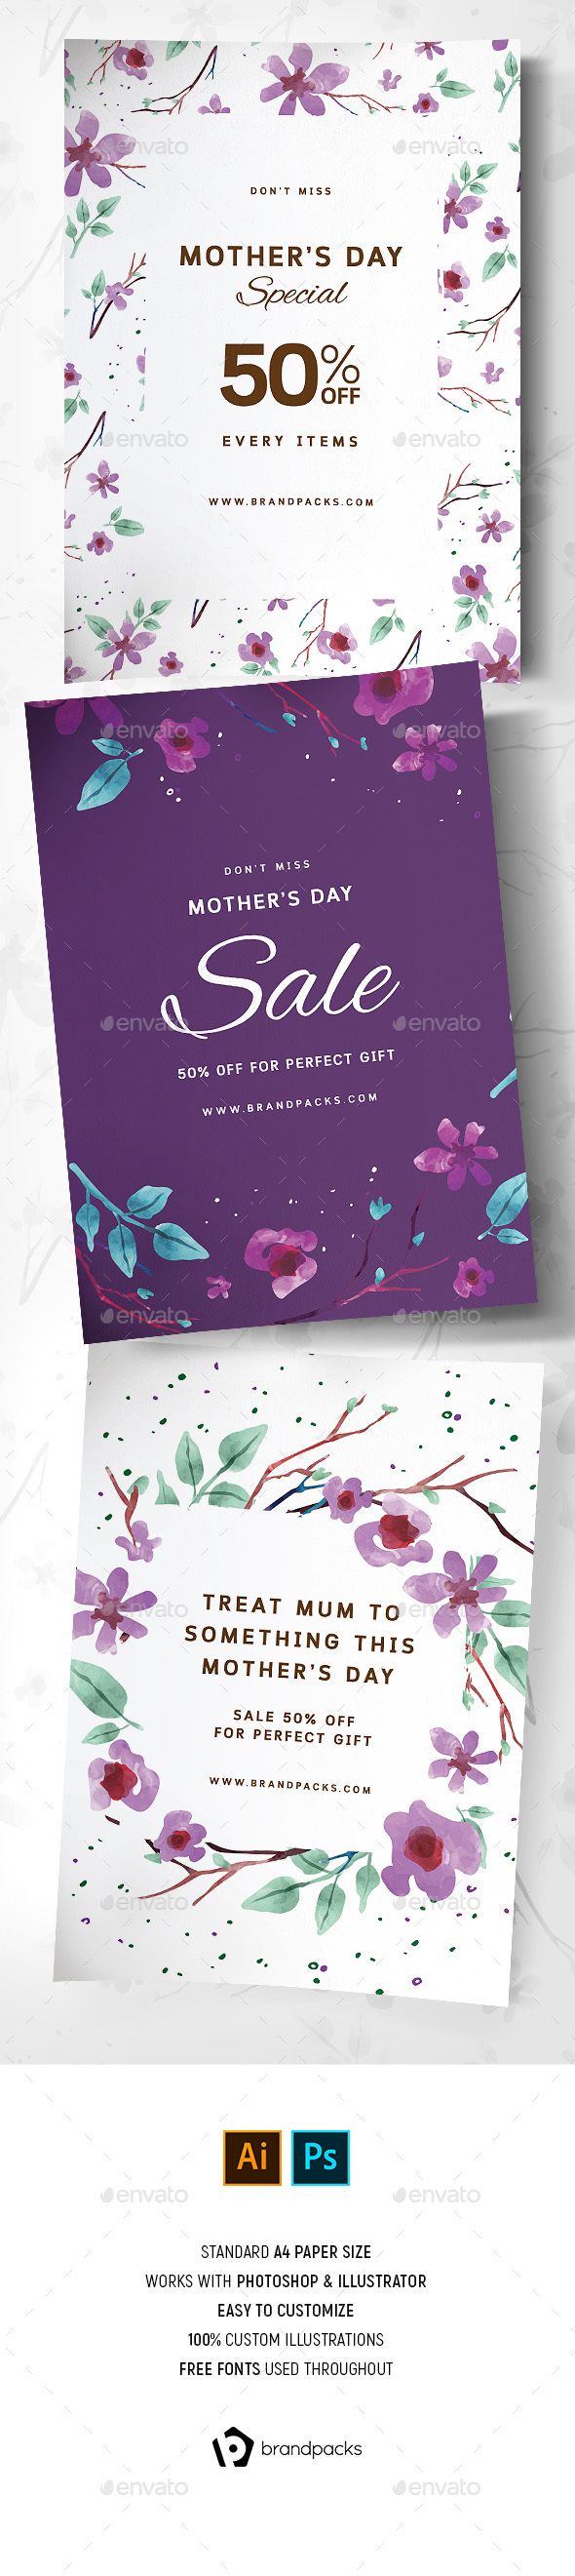 Mother's Day Poster / Flyer Templates